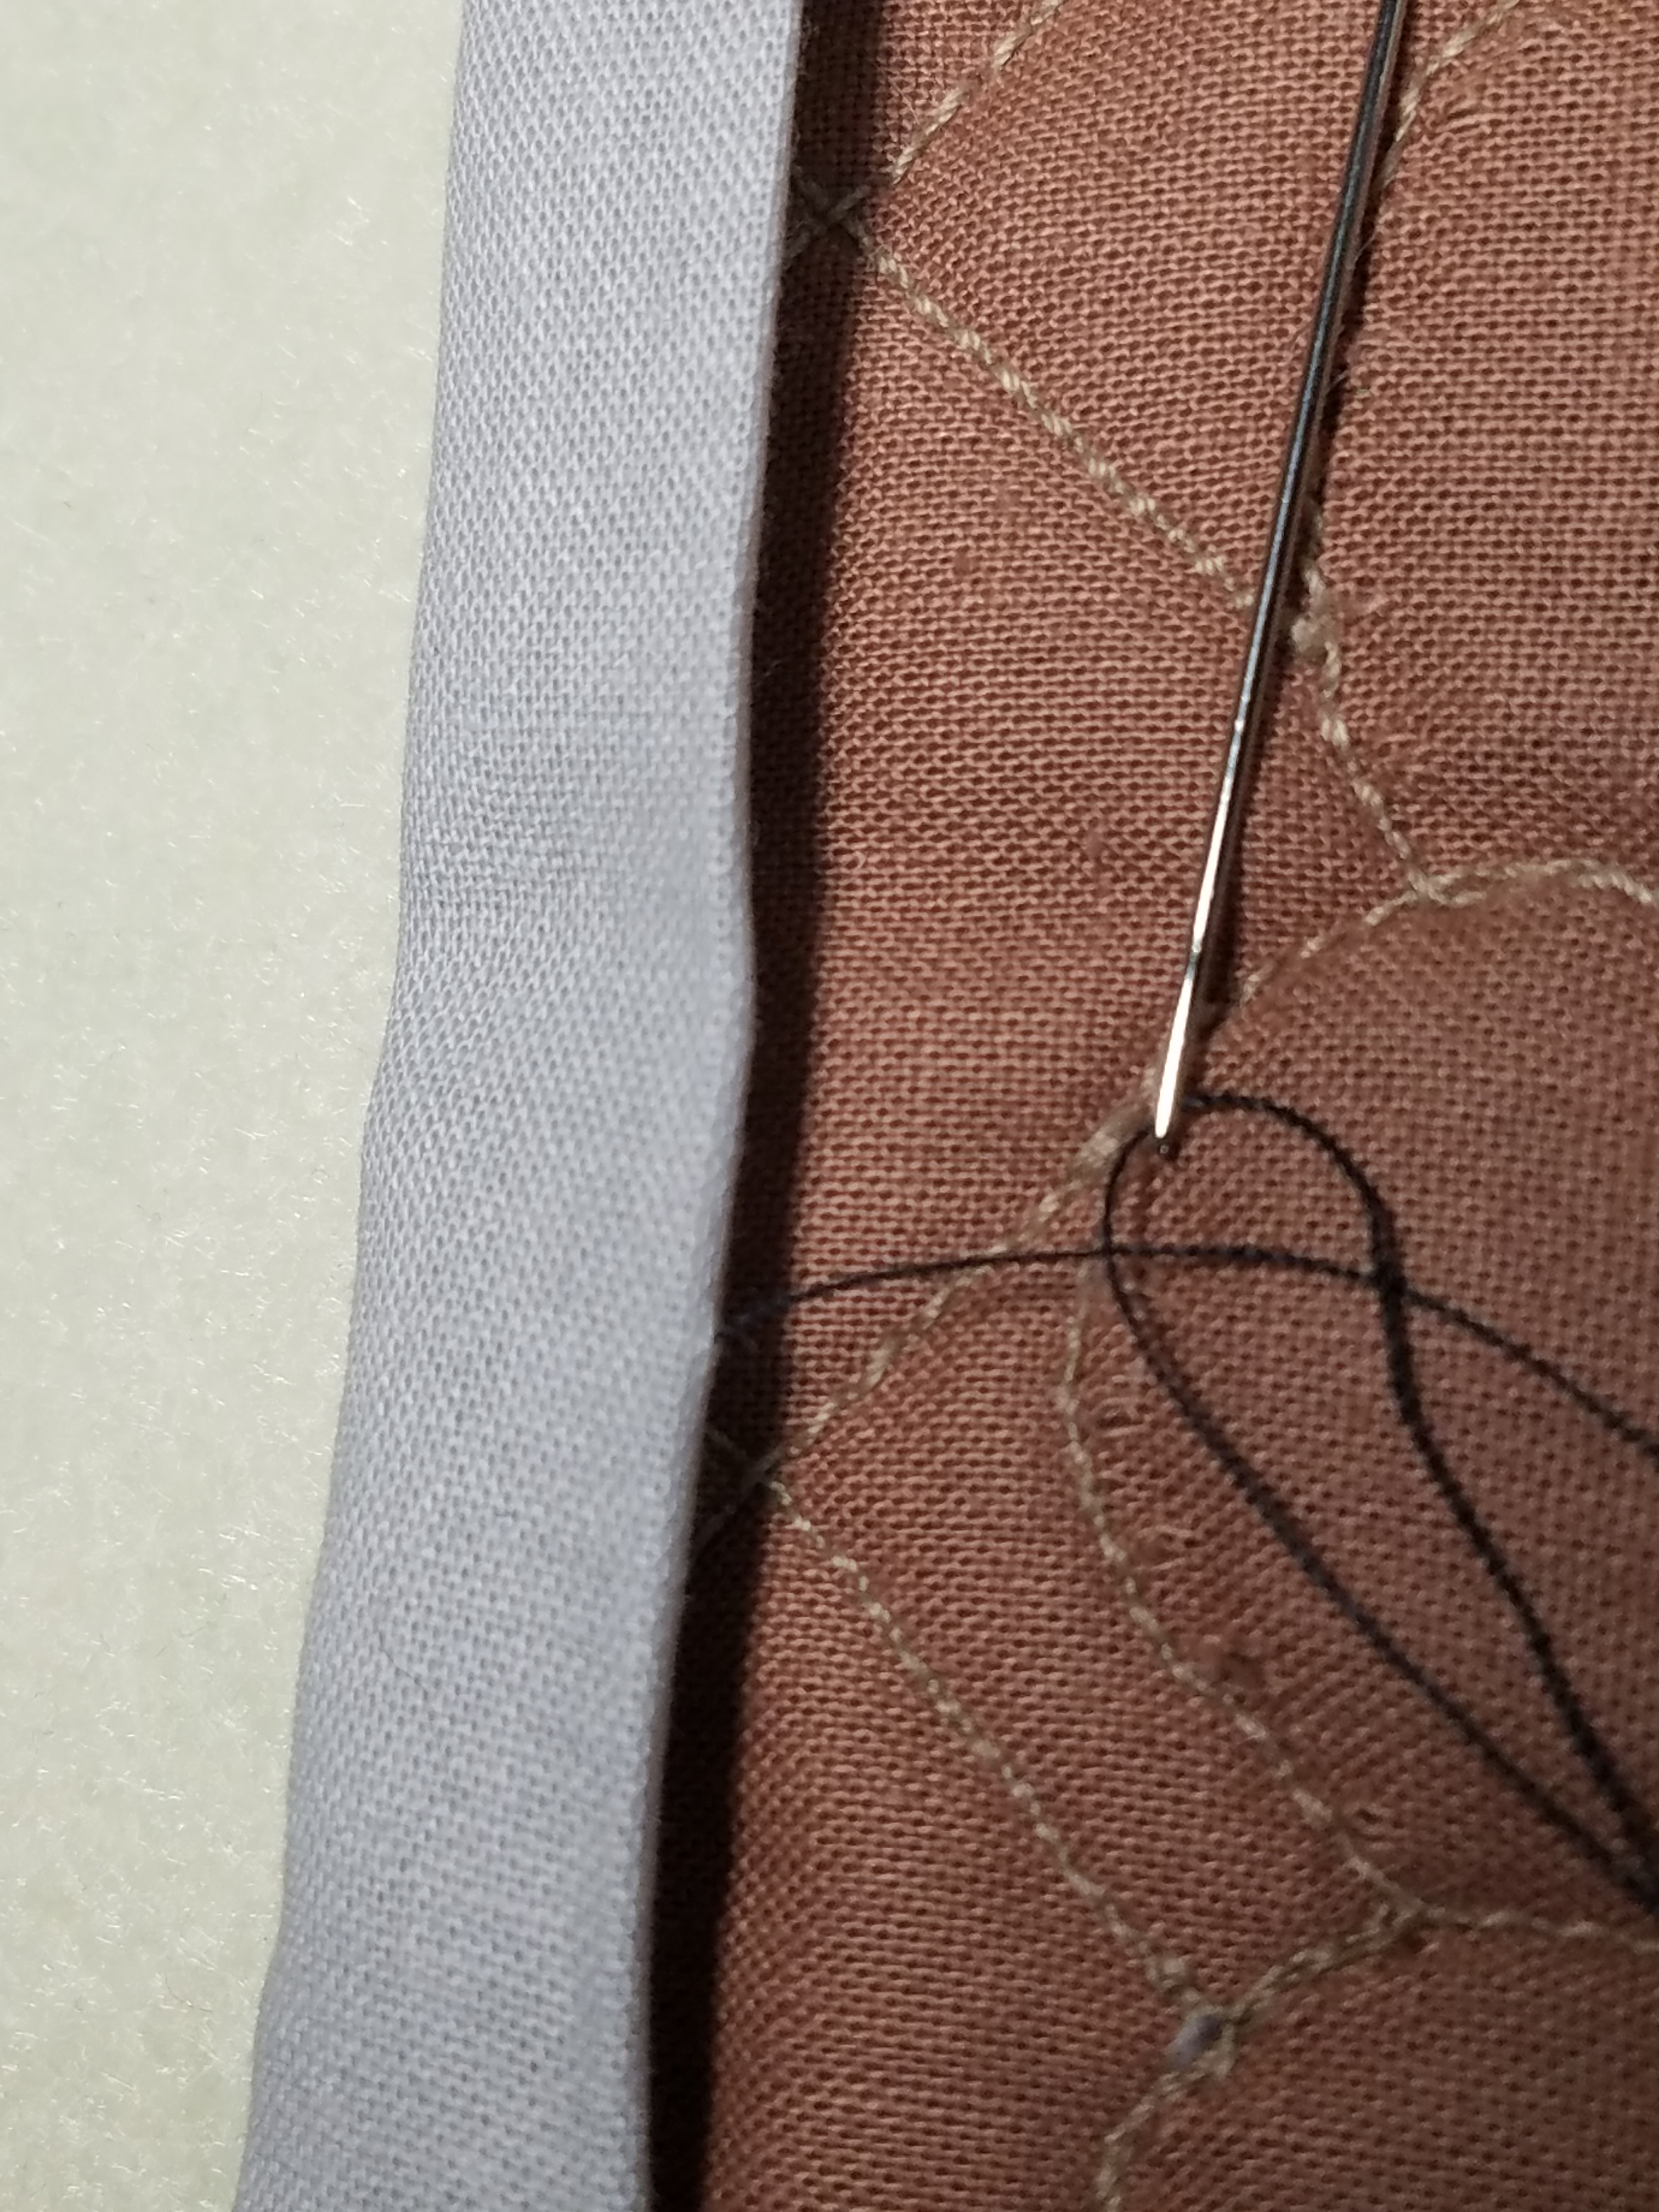 Sewing needle and brown fabric